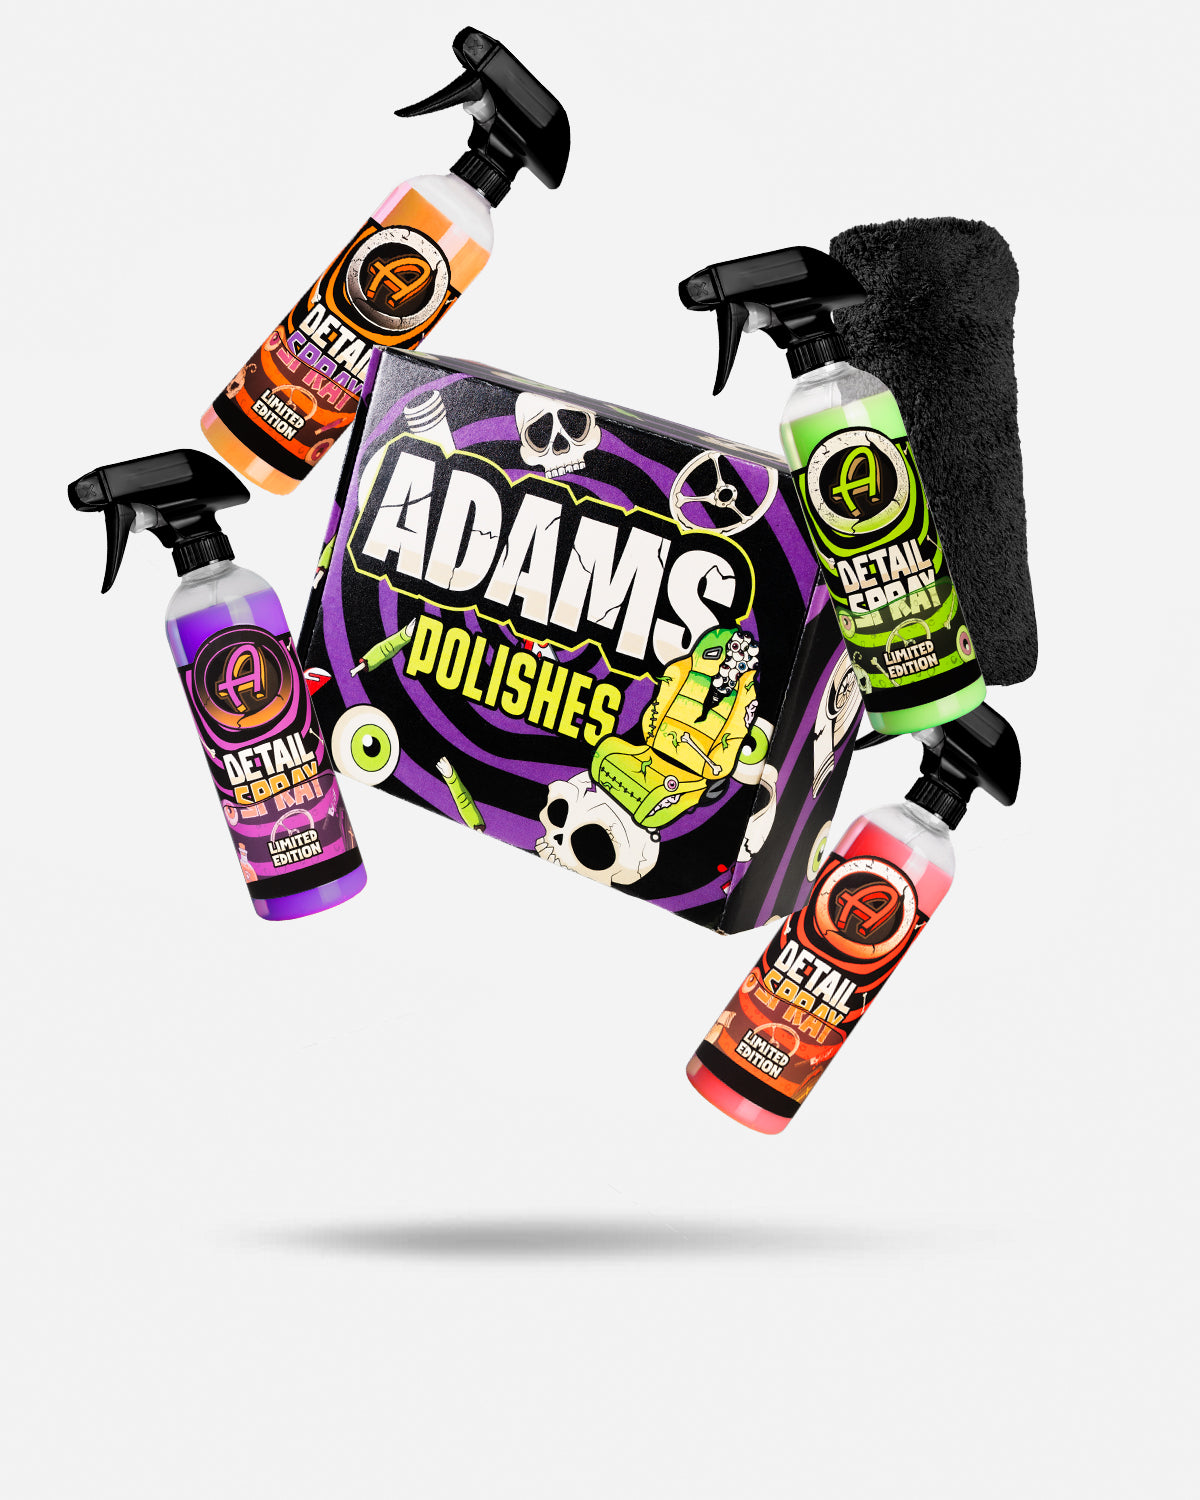 Adam's Polishes Air Cannon Touchless Dryer